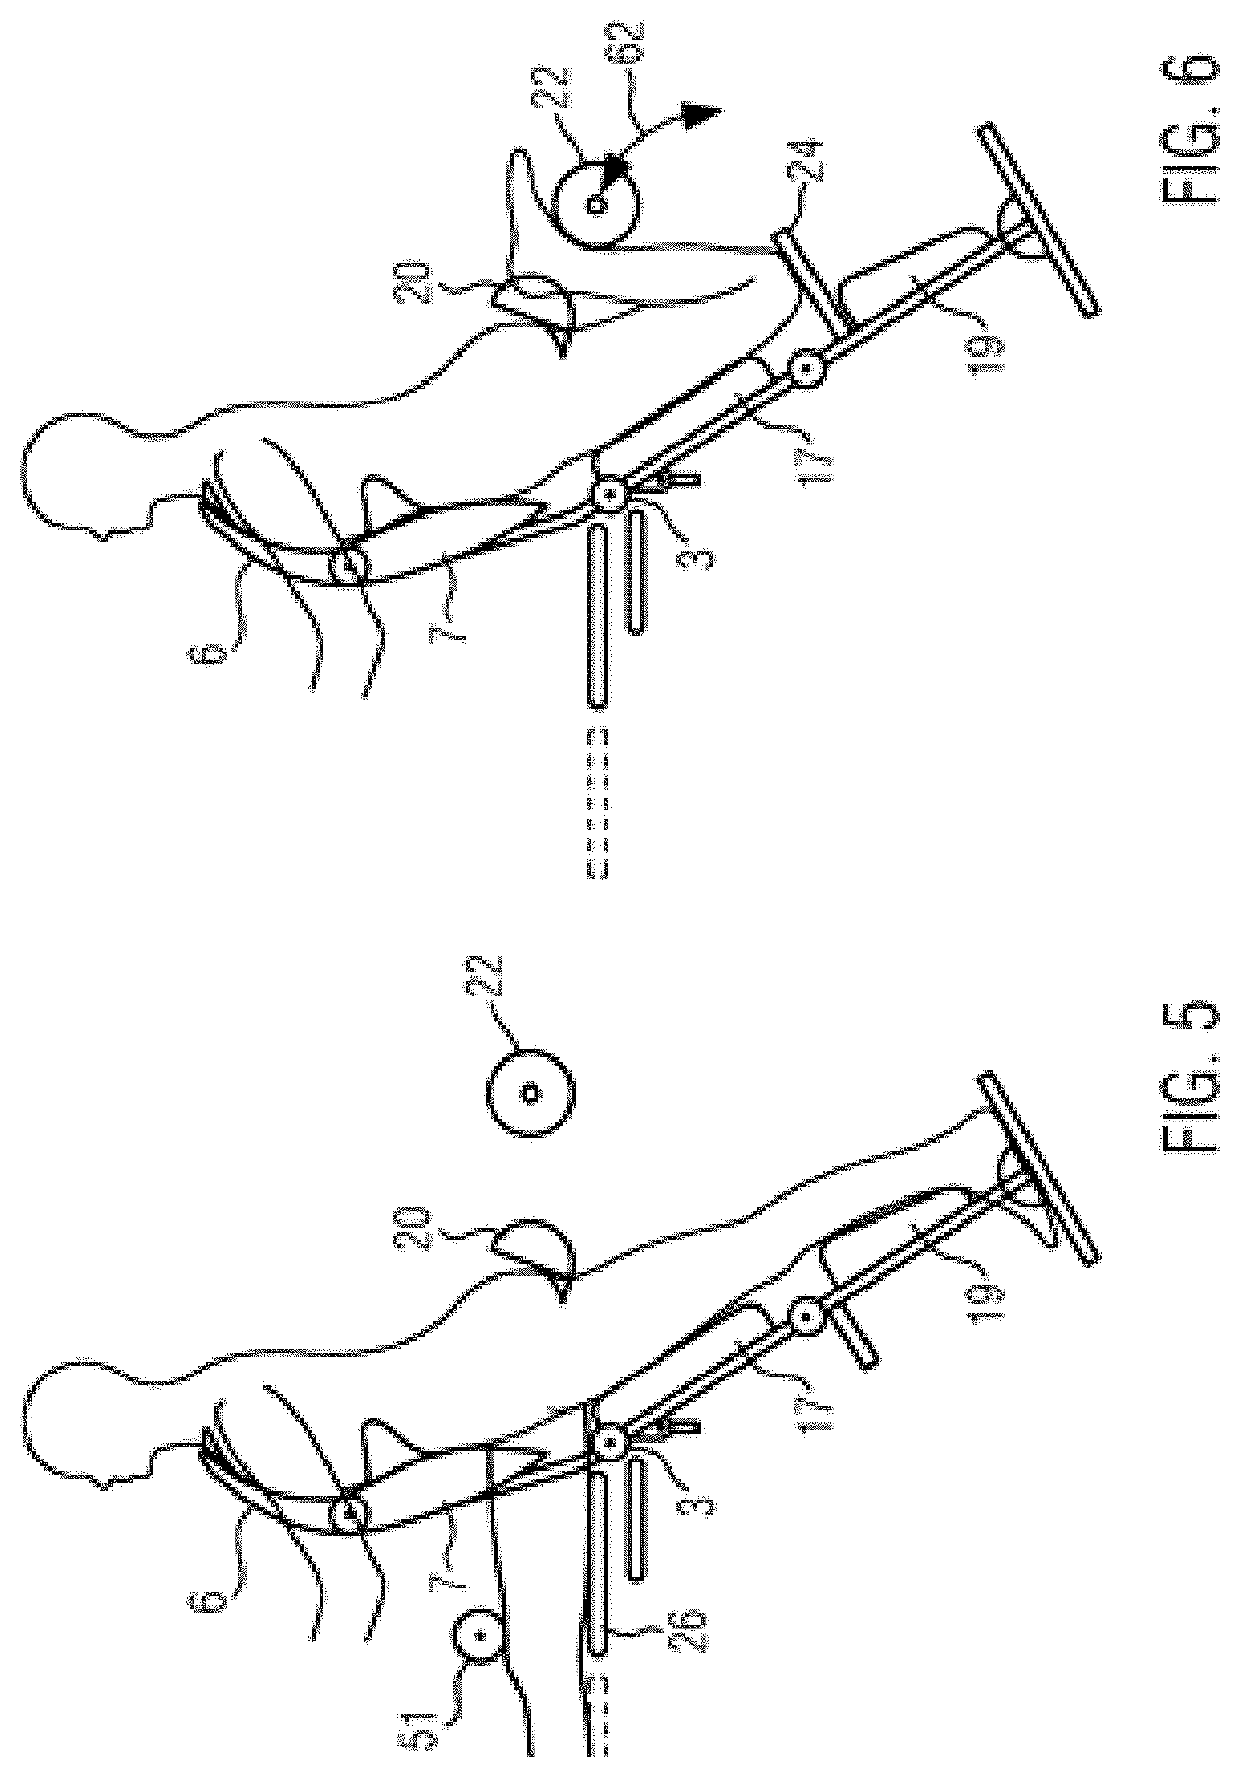 Chair, pressing device